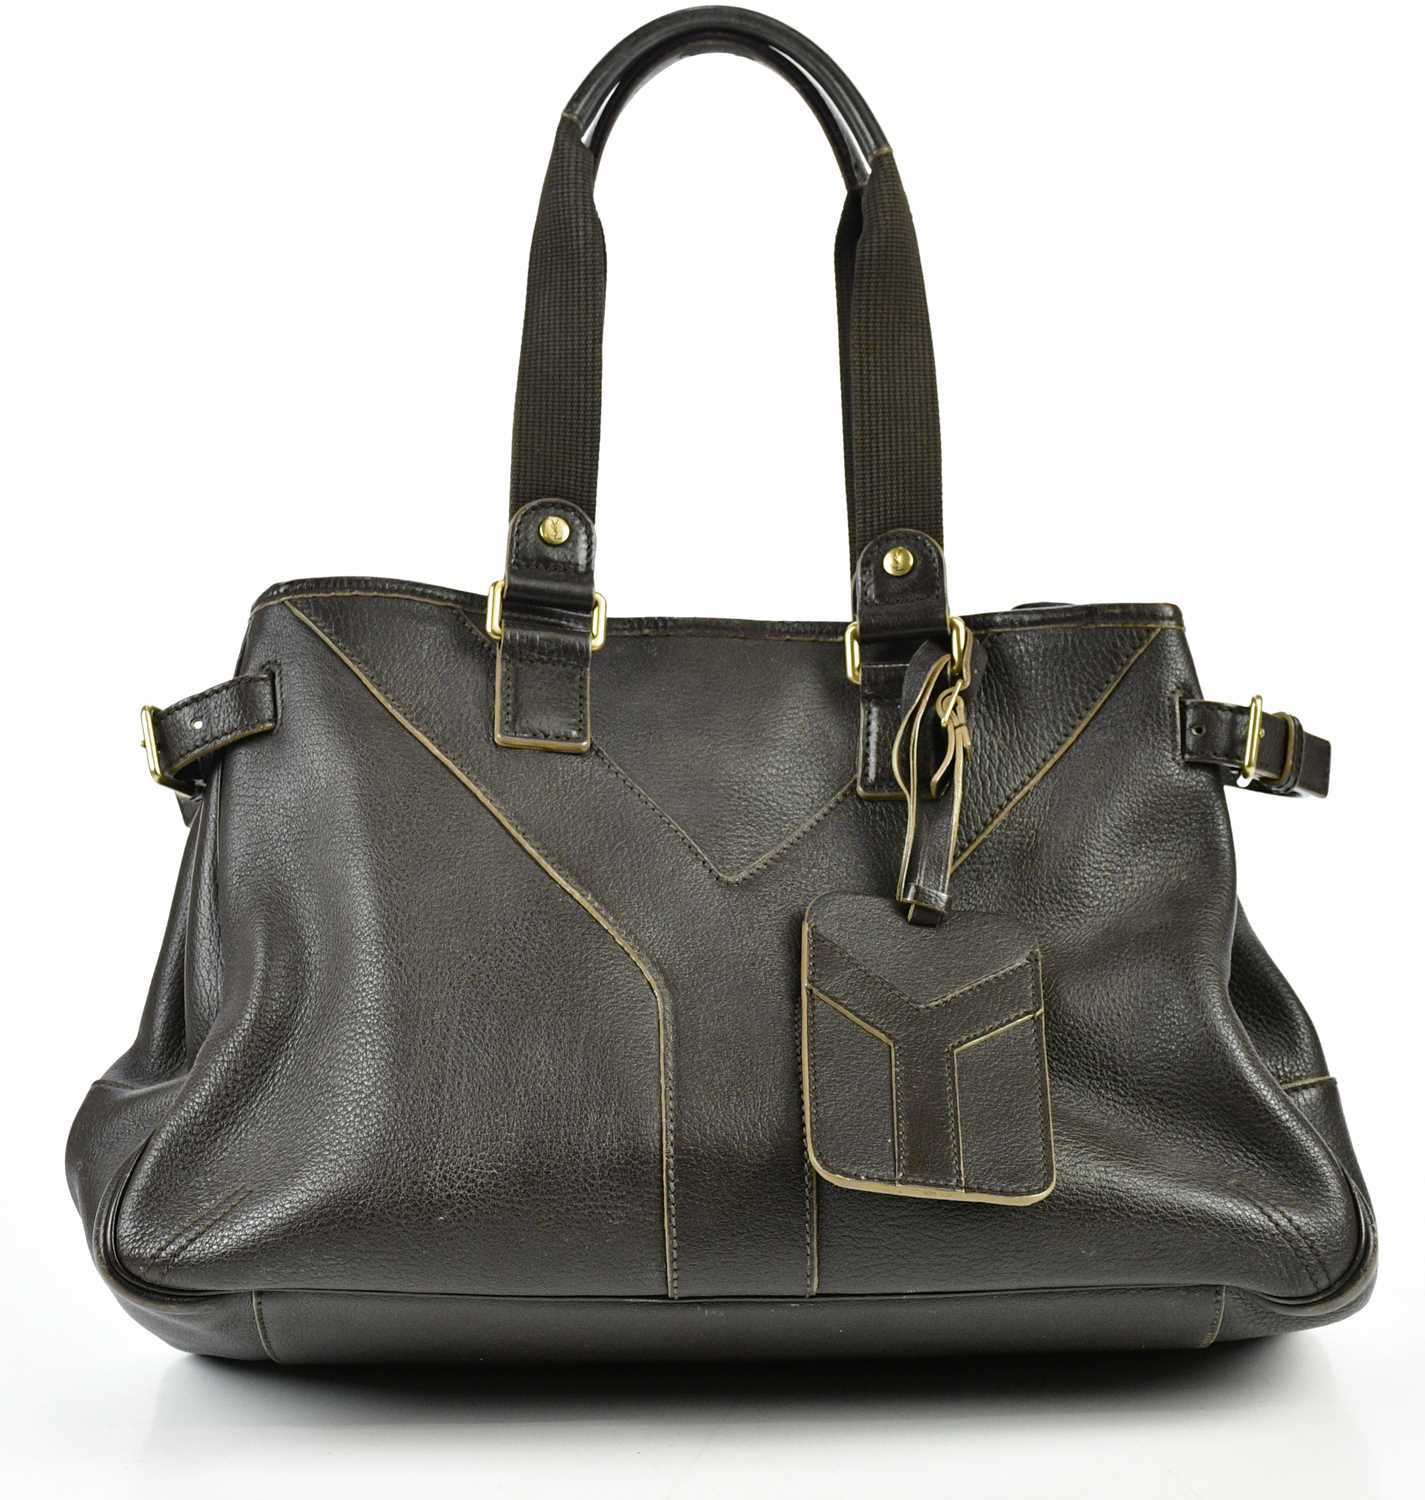 YVES SAINT LAURENT; a brown leather 'Y' bag with gold tone hardware buckles and maker's logo to